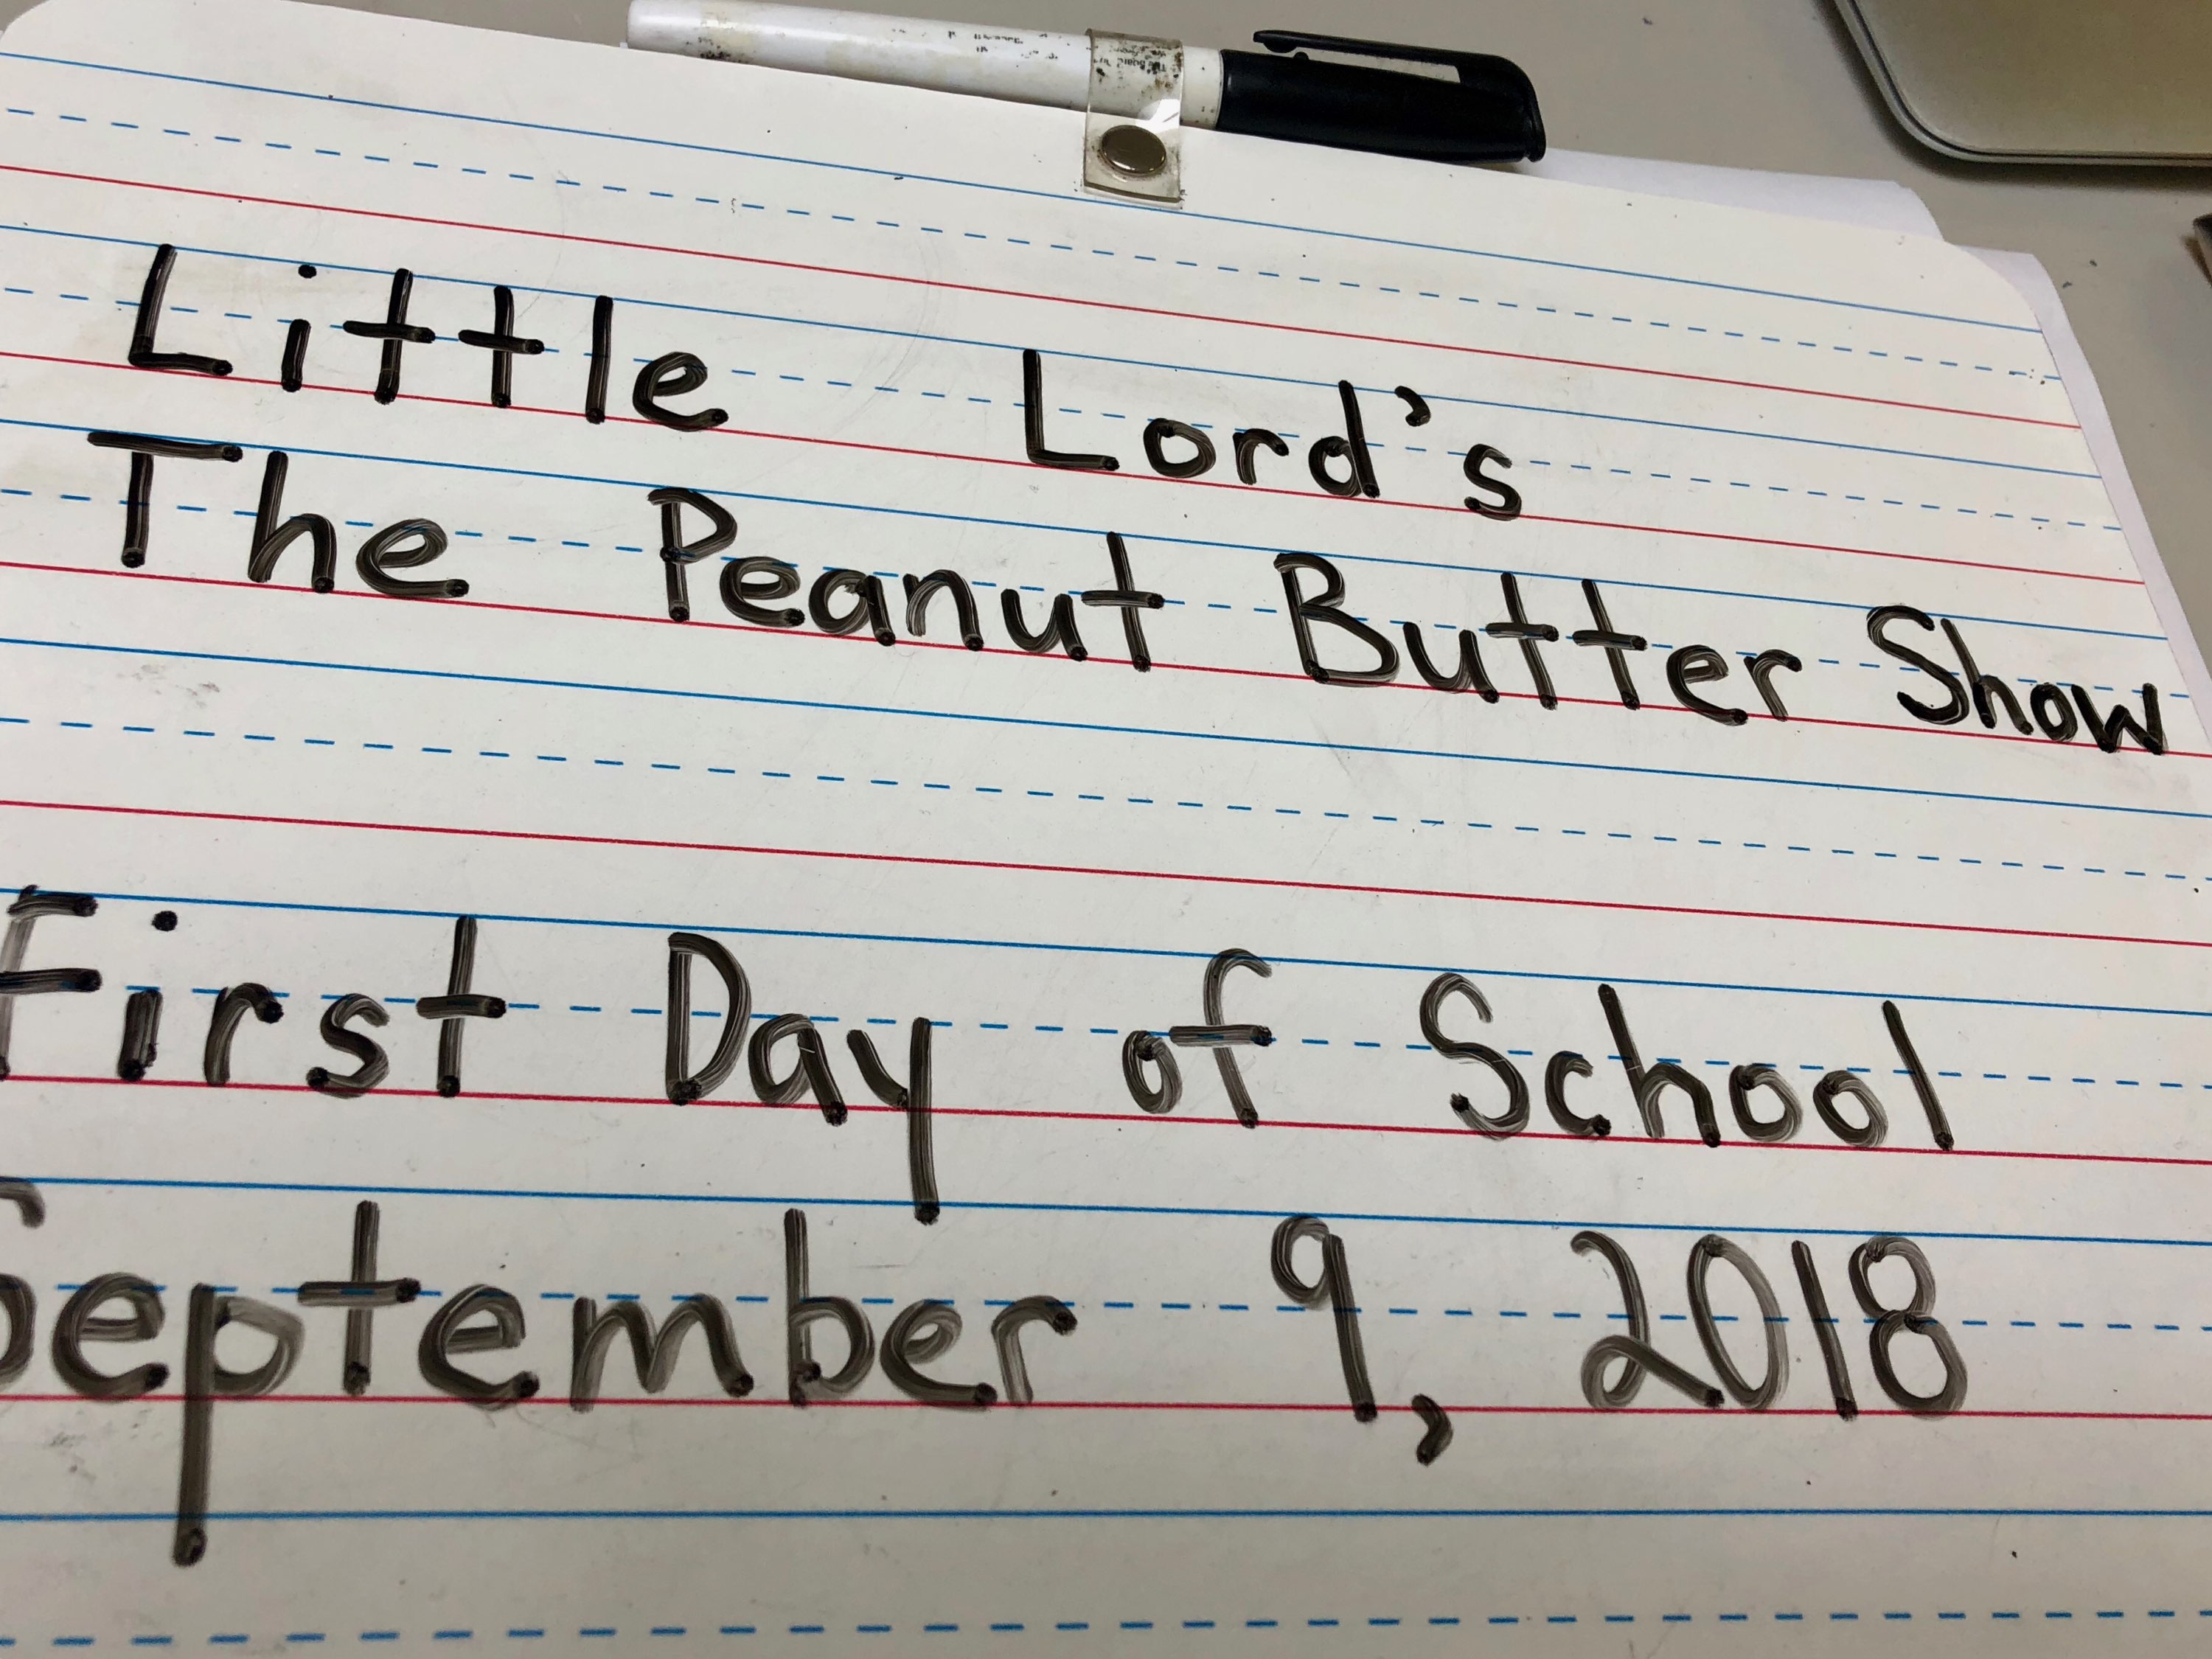 The Peanut Butter Show